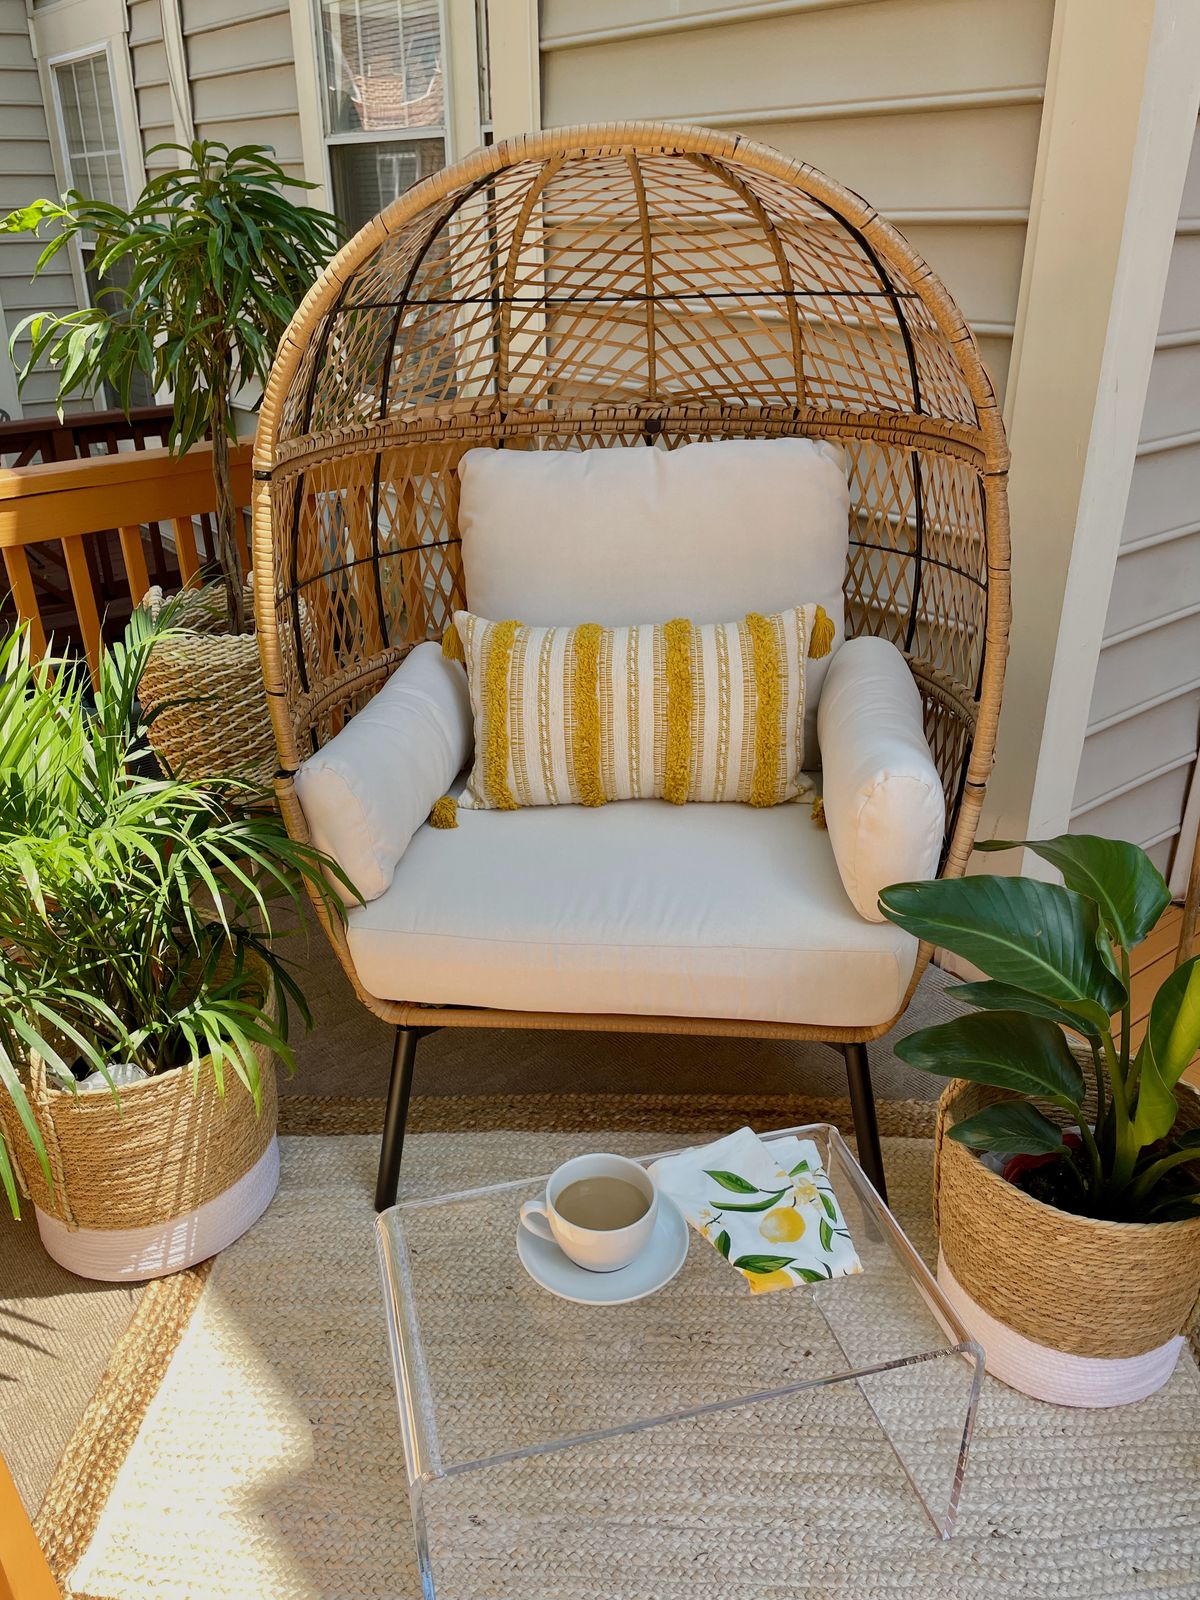 Yellow Citrus Summer Patio Decor Update with Egg Chair, Yellow Pillow, acrylic table, jute rug, jute planters, majestic palm and lemon cloth napkins from Walmart